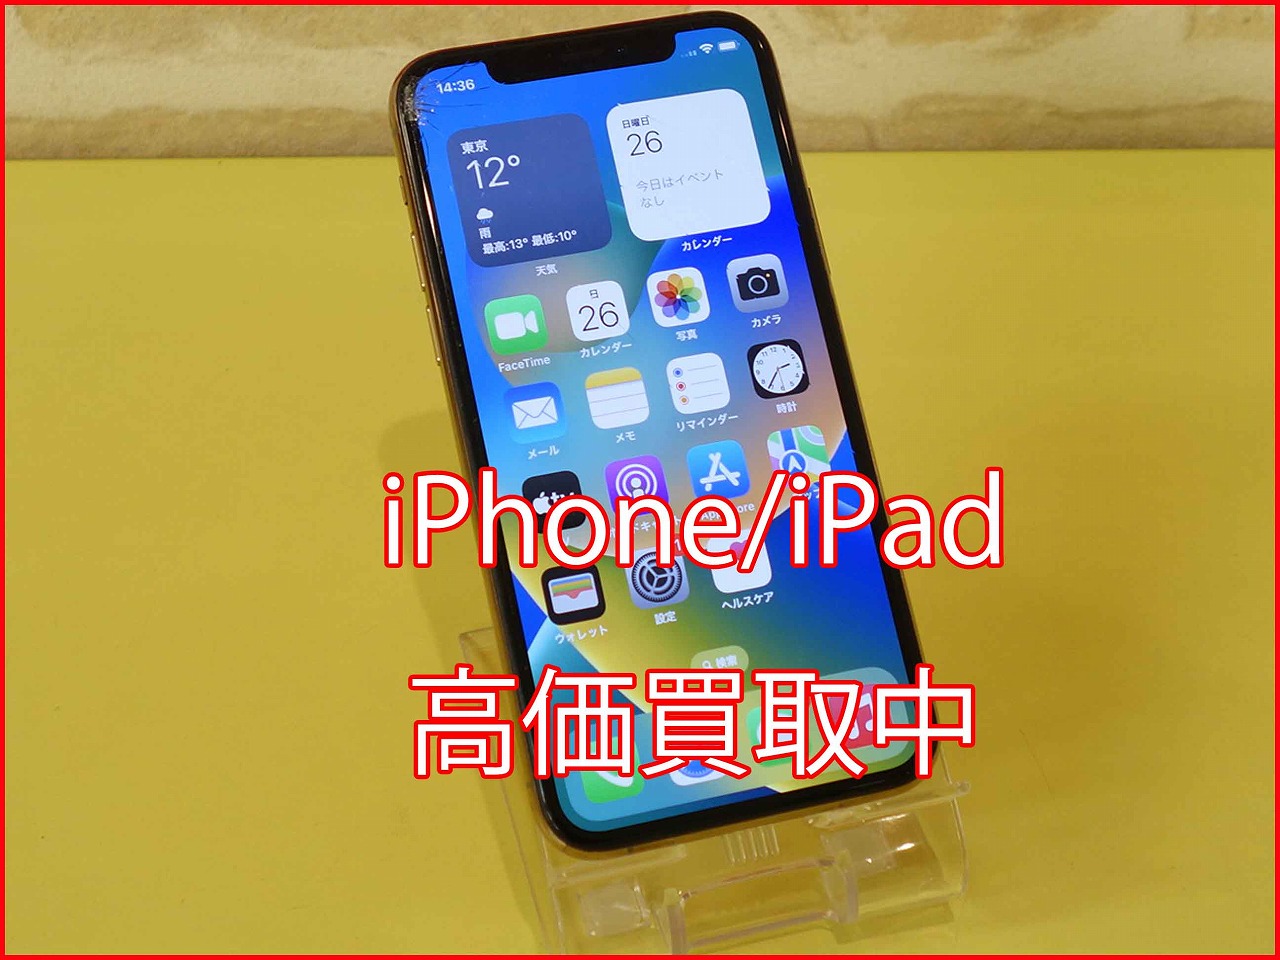 iPhone 11Proの買い取り実積（名古屋駅前店）